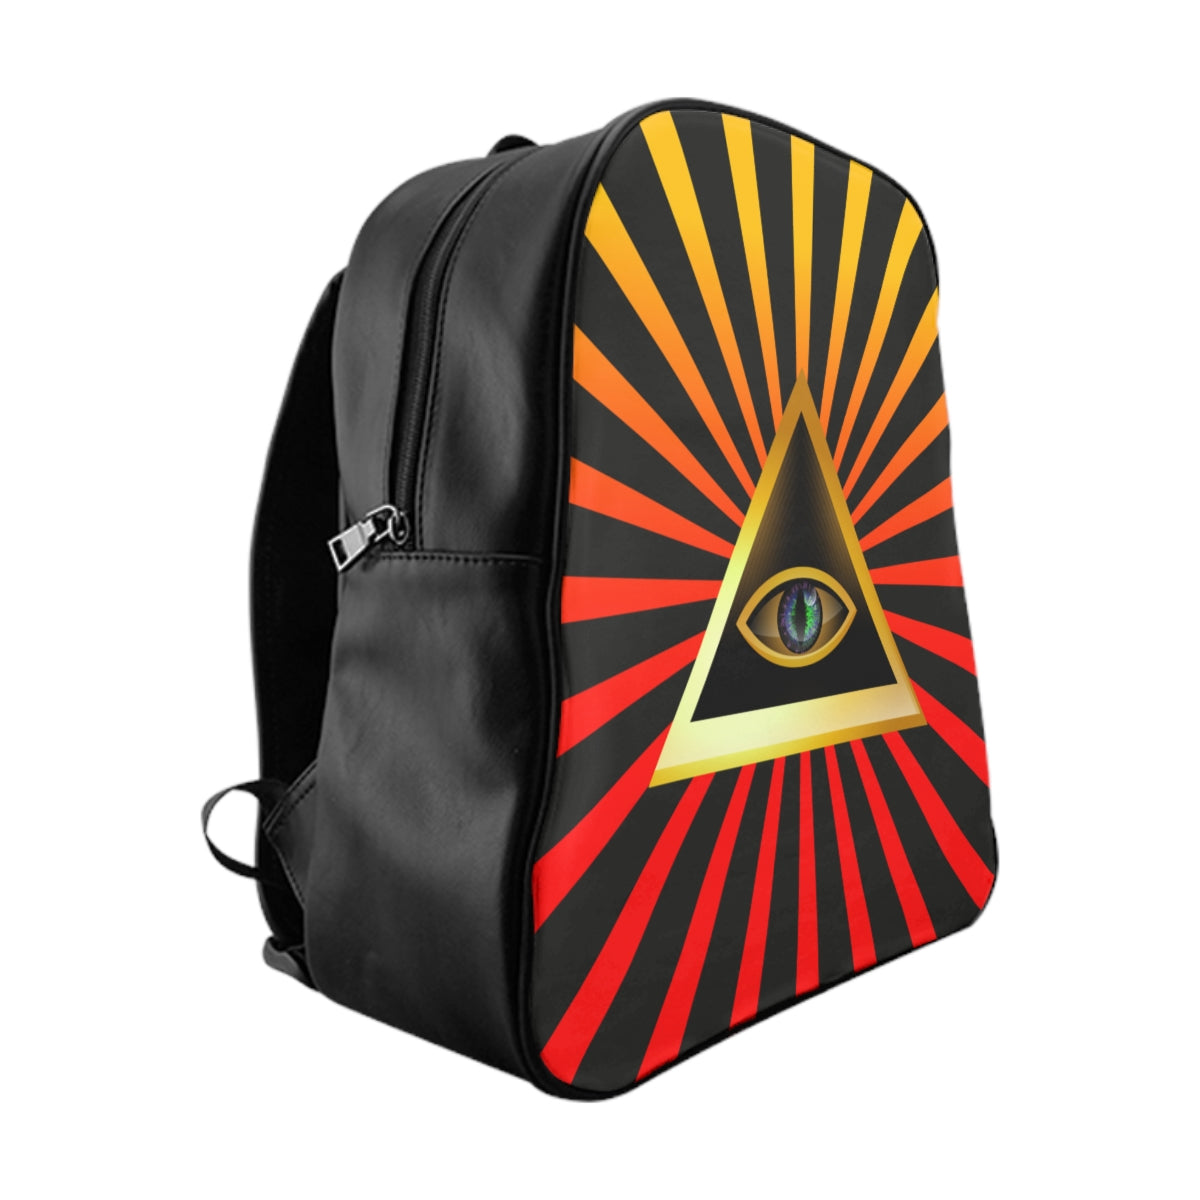 Getrott Illuminati Triangle Eye School Backpack Carry-On Travel Check Luggage 4-Wheel Spinner Suitcase Bag Multiple Colors and Sizes